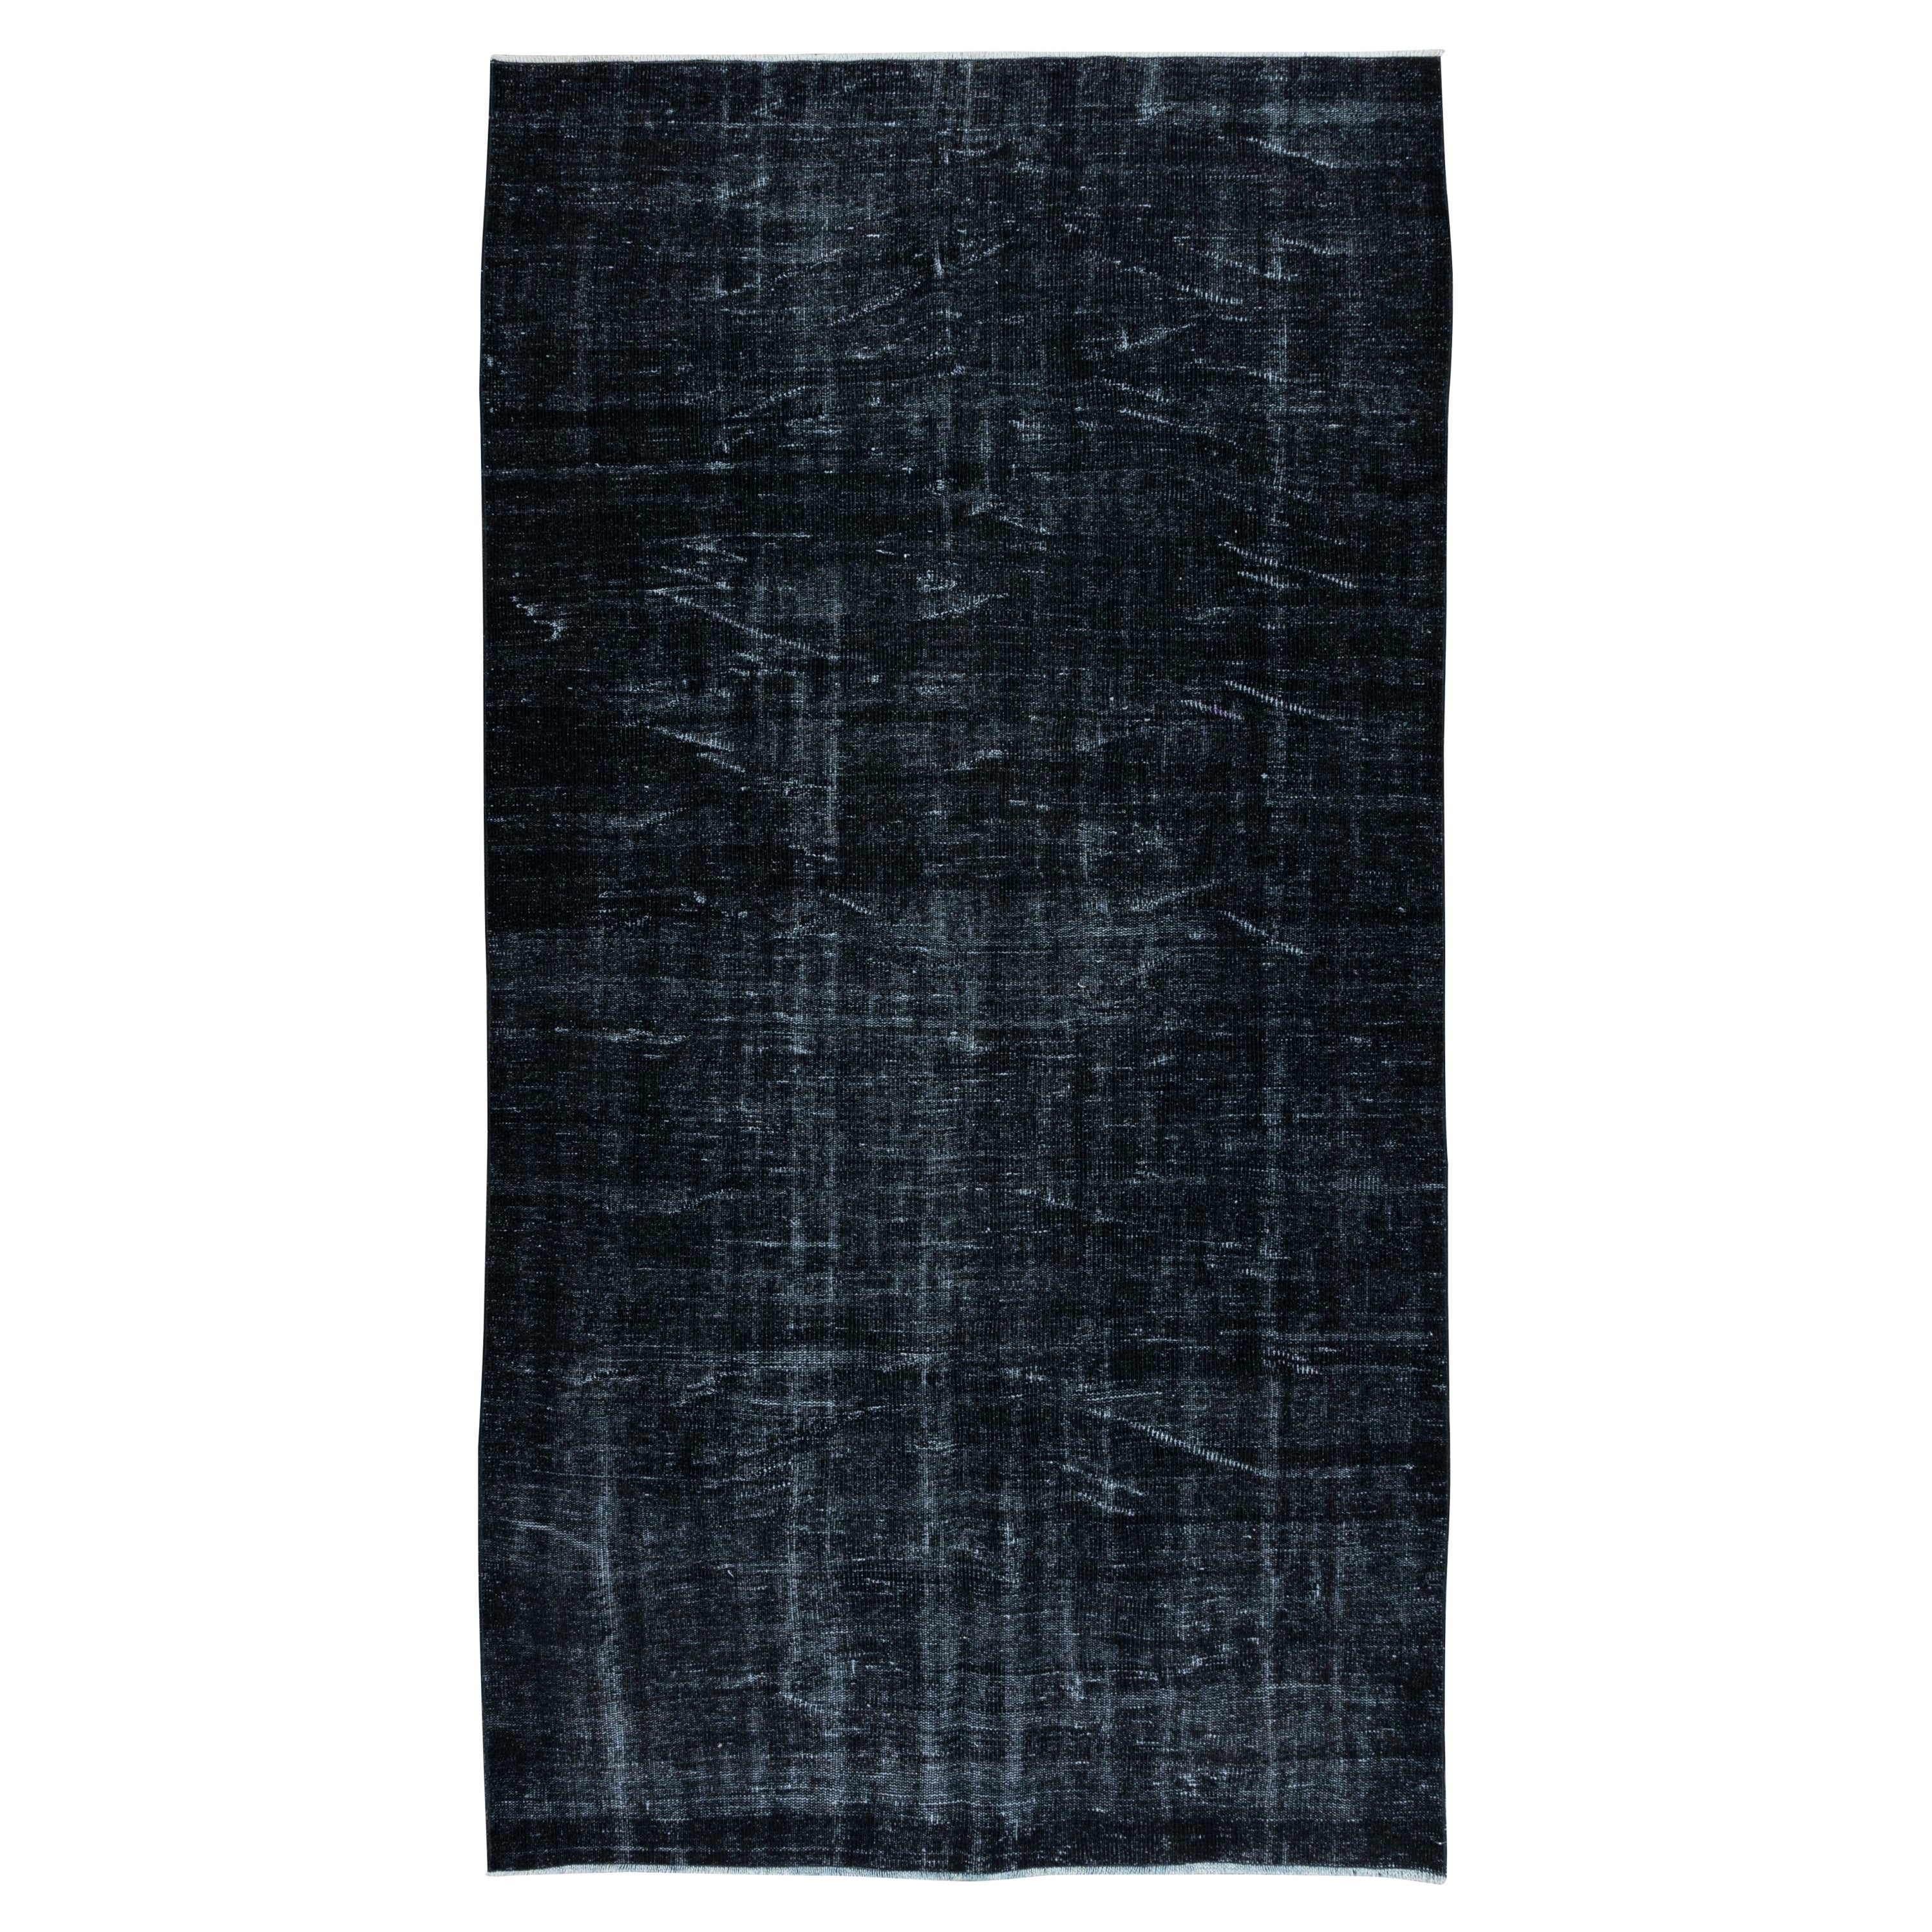 5.2x9.6 Ft Overdyed Black Area Rug, Handmade in Turkey, Modern Upcycled Carpet For Sale